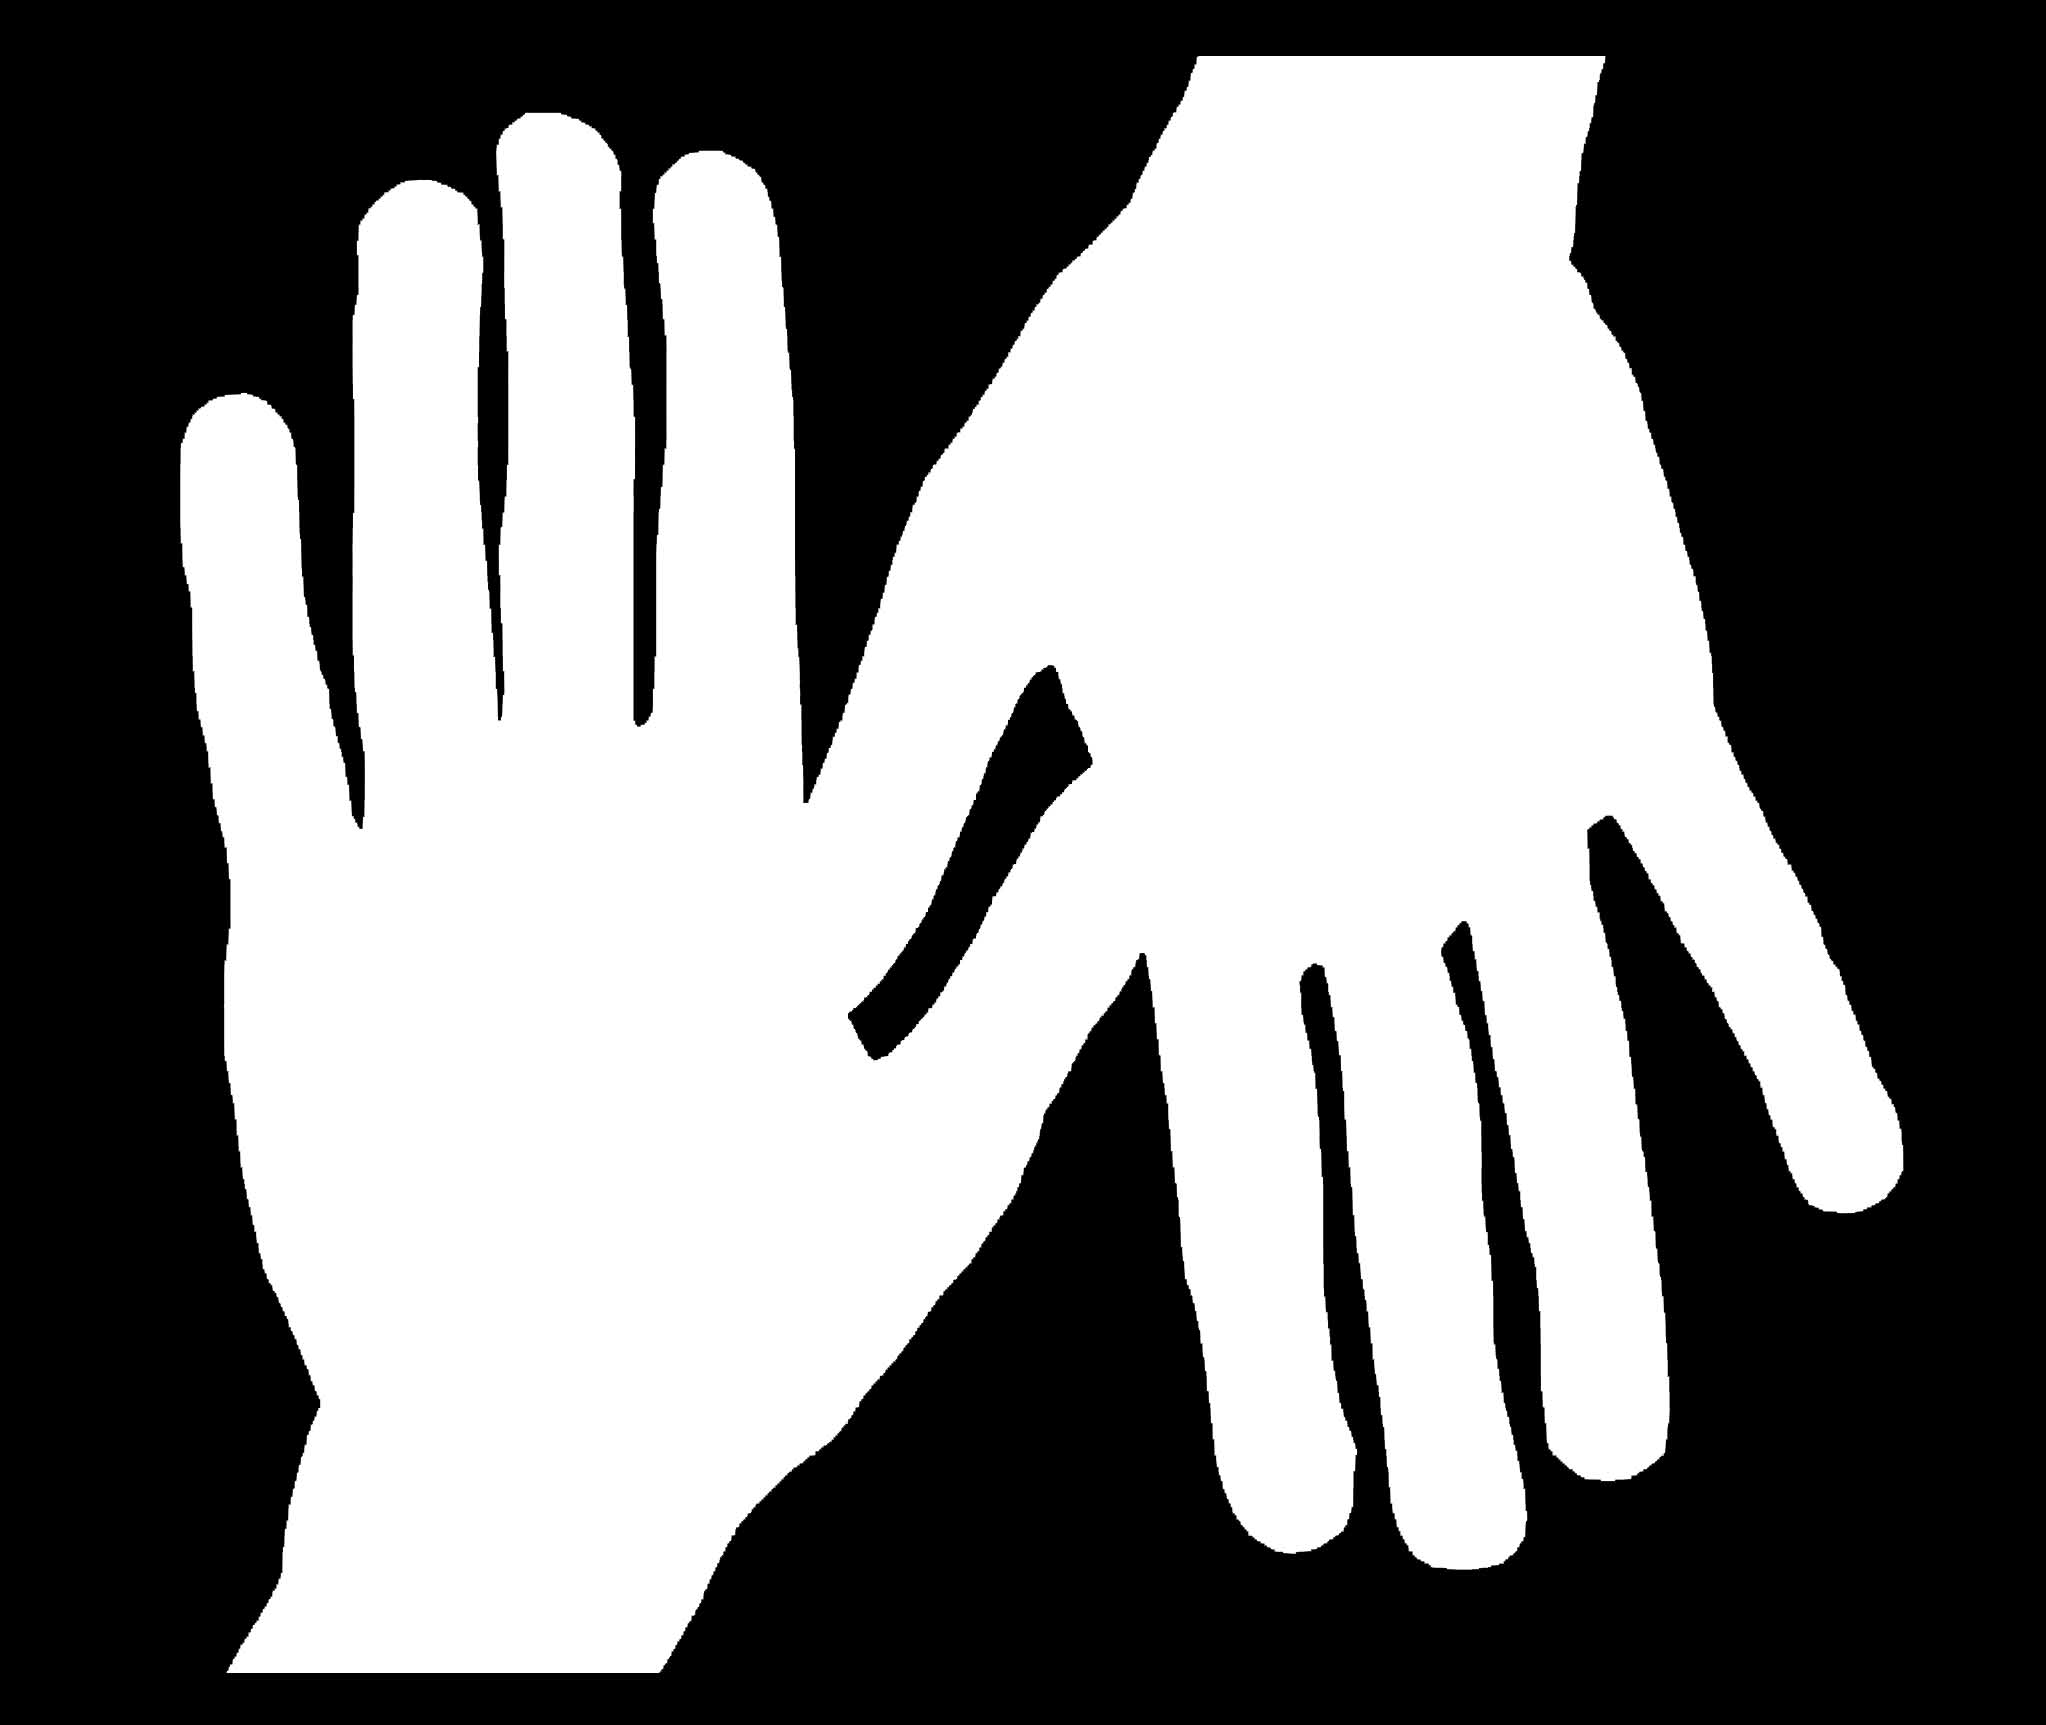 Hand Outline - ClipArt Best